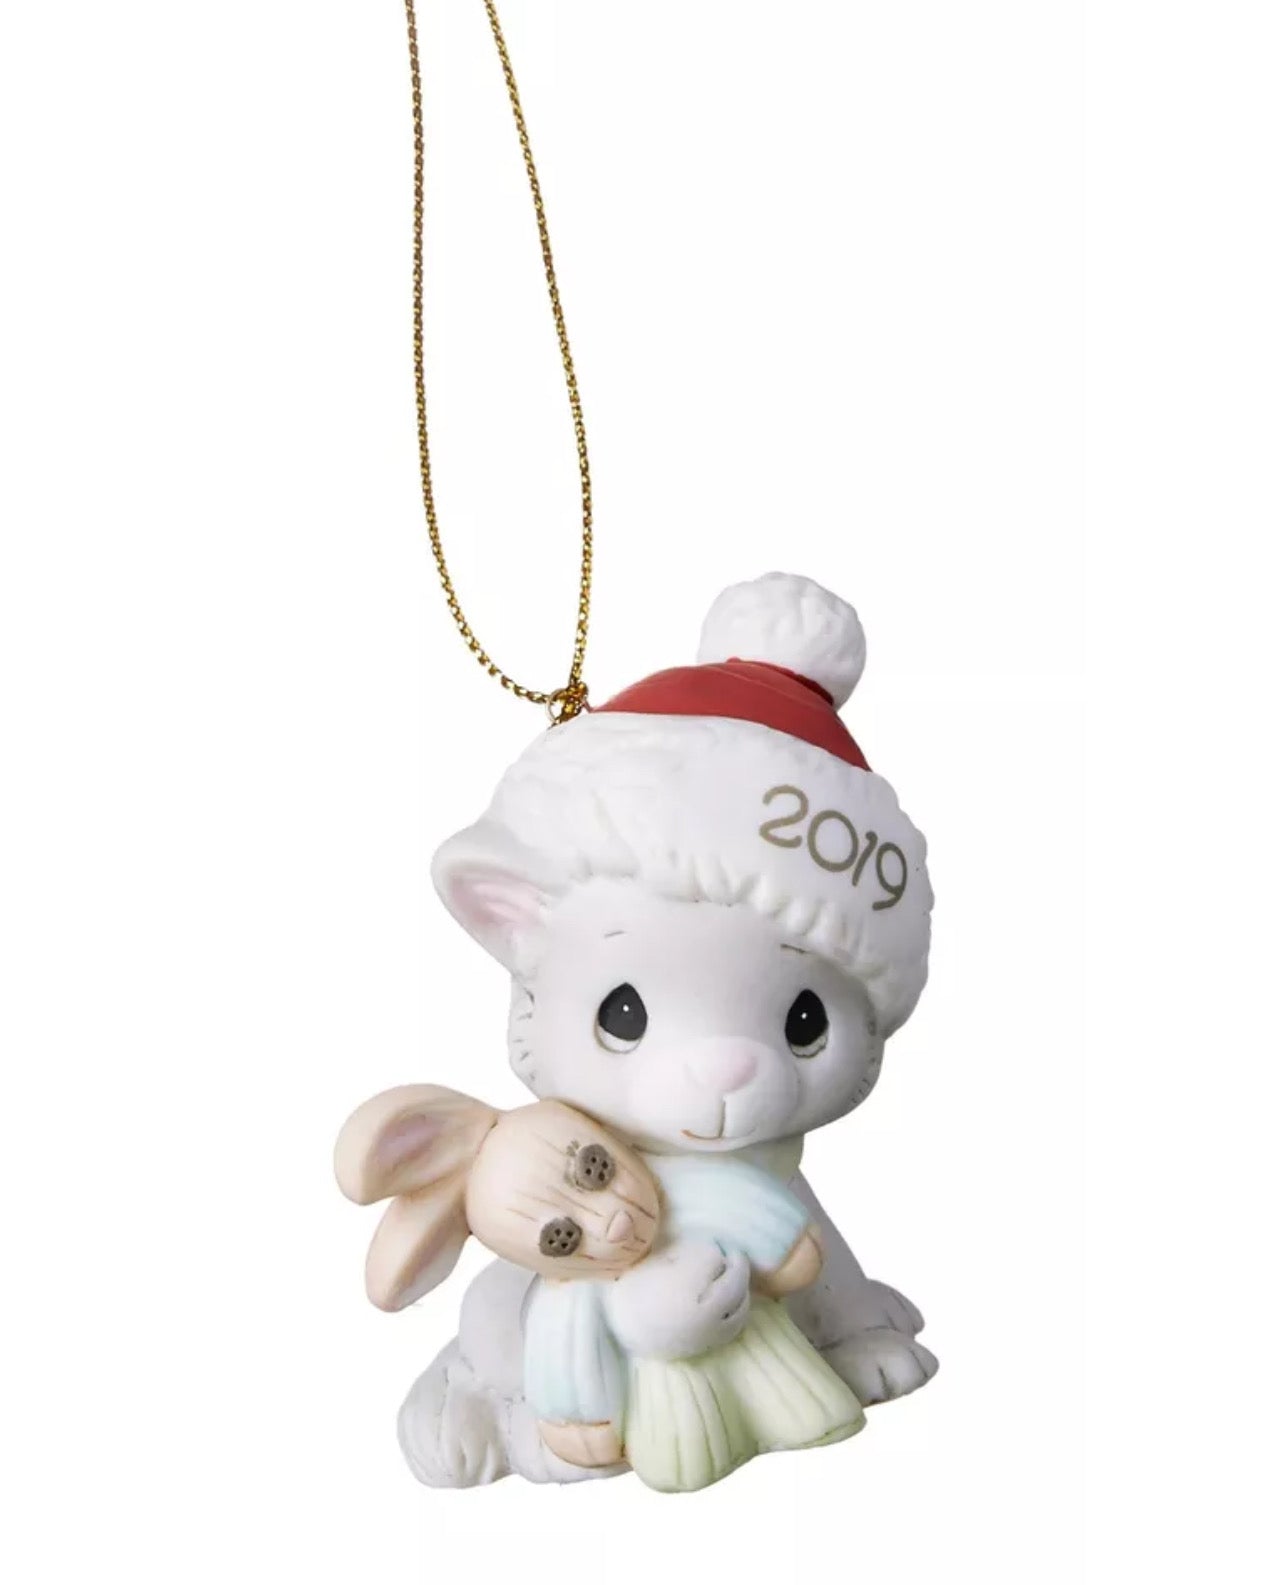 Christmas Kitty Cuddles - 2019 Dated Annual Precious Moment Ornament